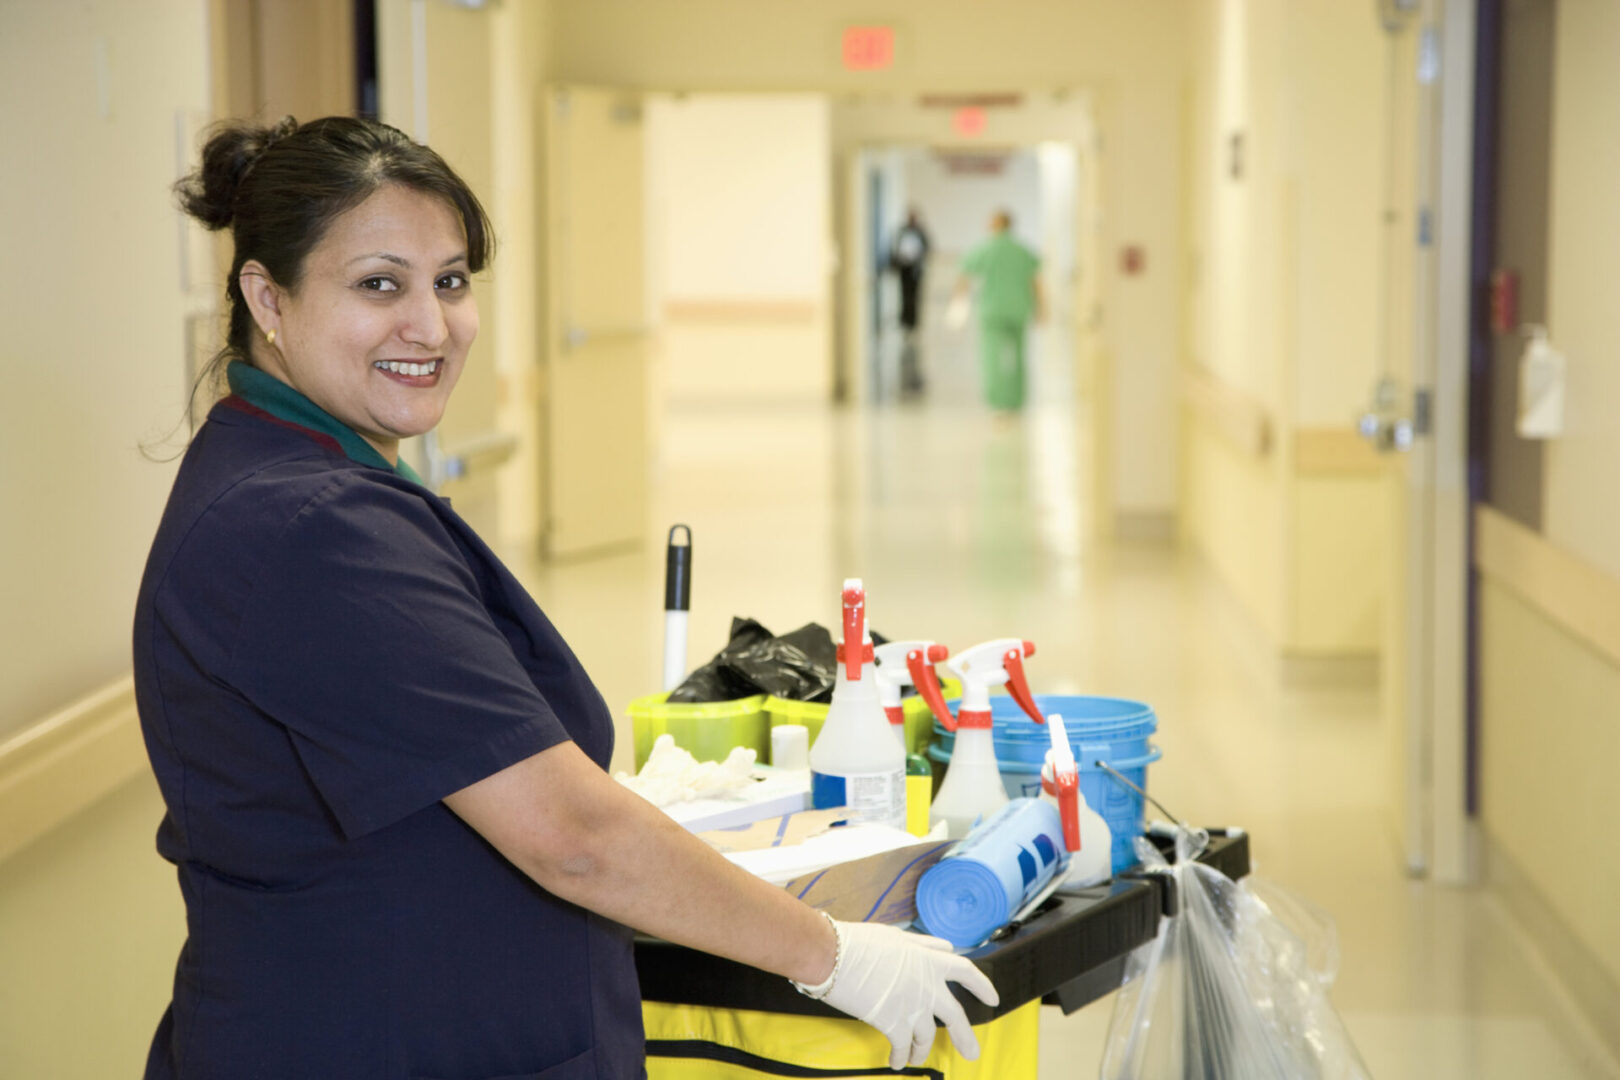 A woman in blue shirt holding cleaning supplies.